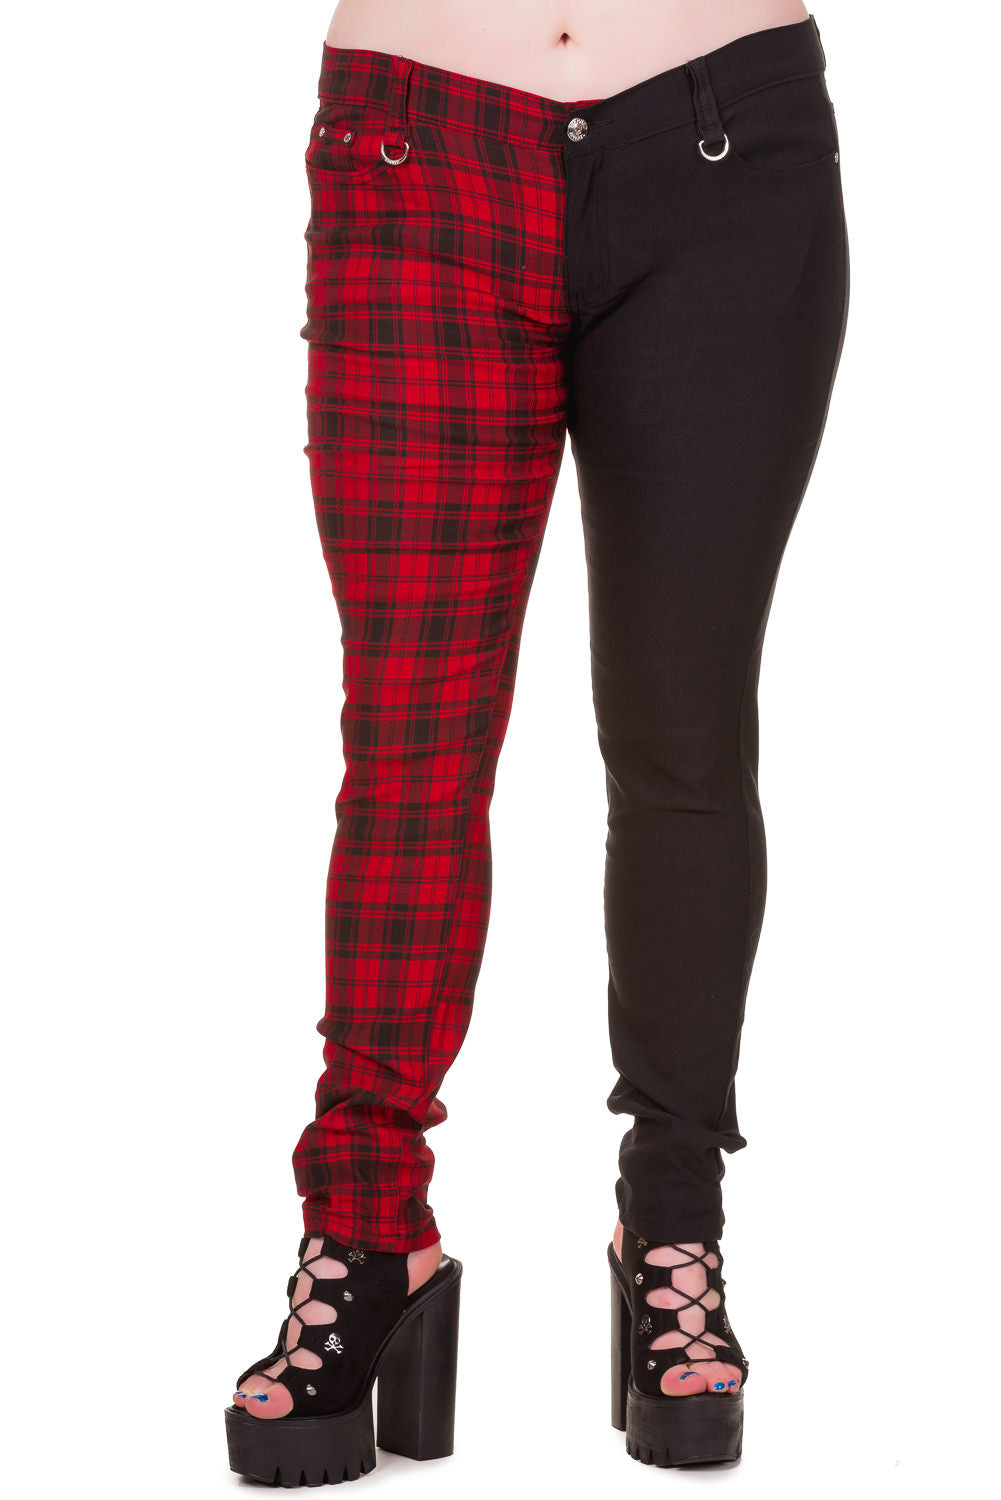 Low rise skinny jeans with one black leg and one red check leg